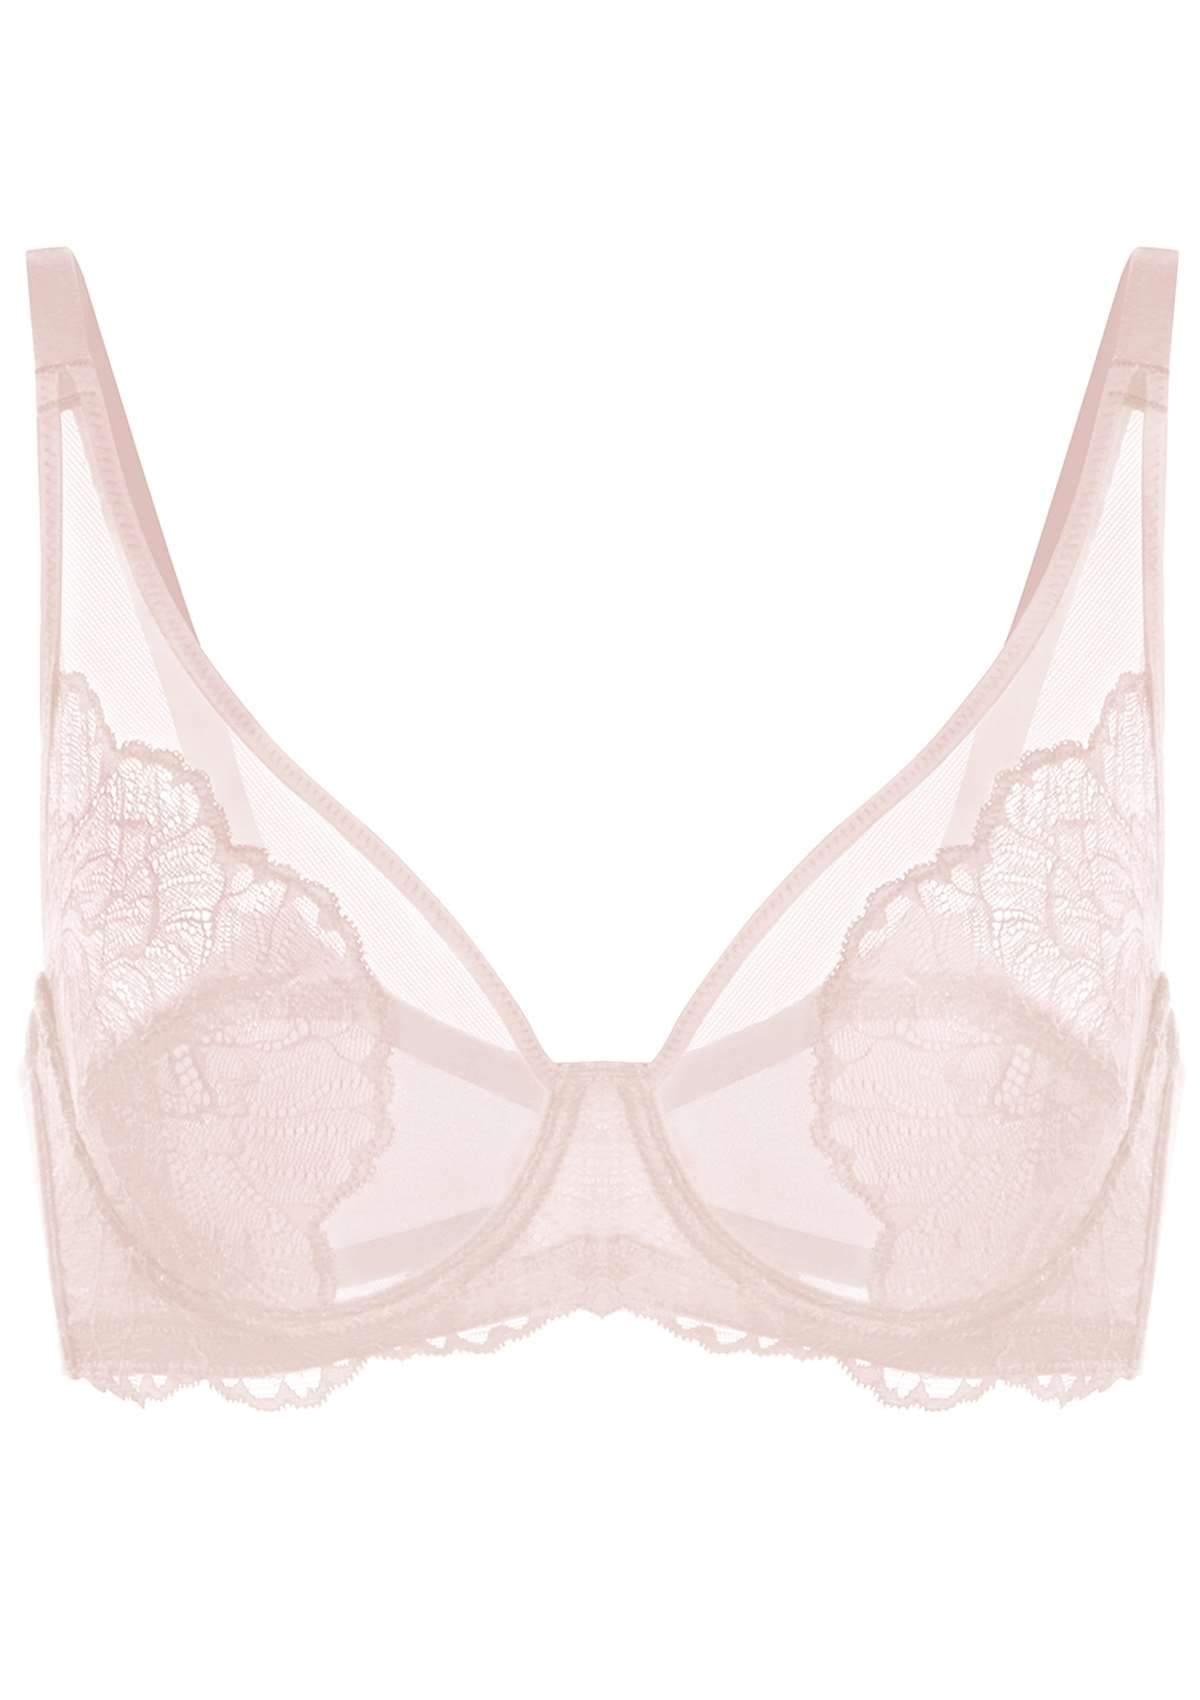 HSIA Blossom Lace Bra And Panties Set: Best Bra For Large Busts - Dark Pink / 44 / C